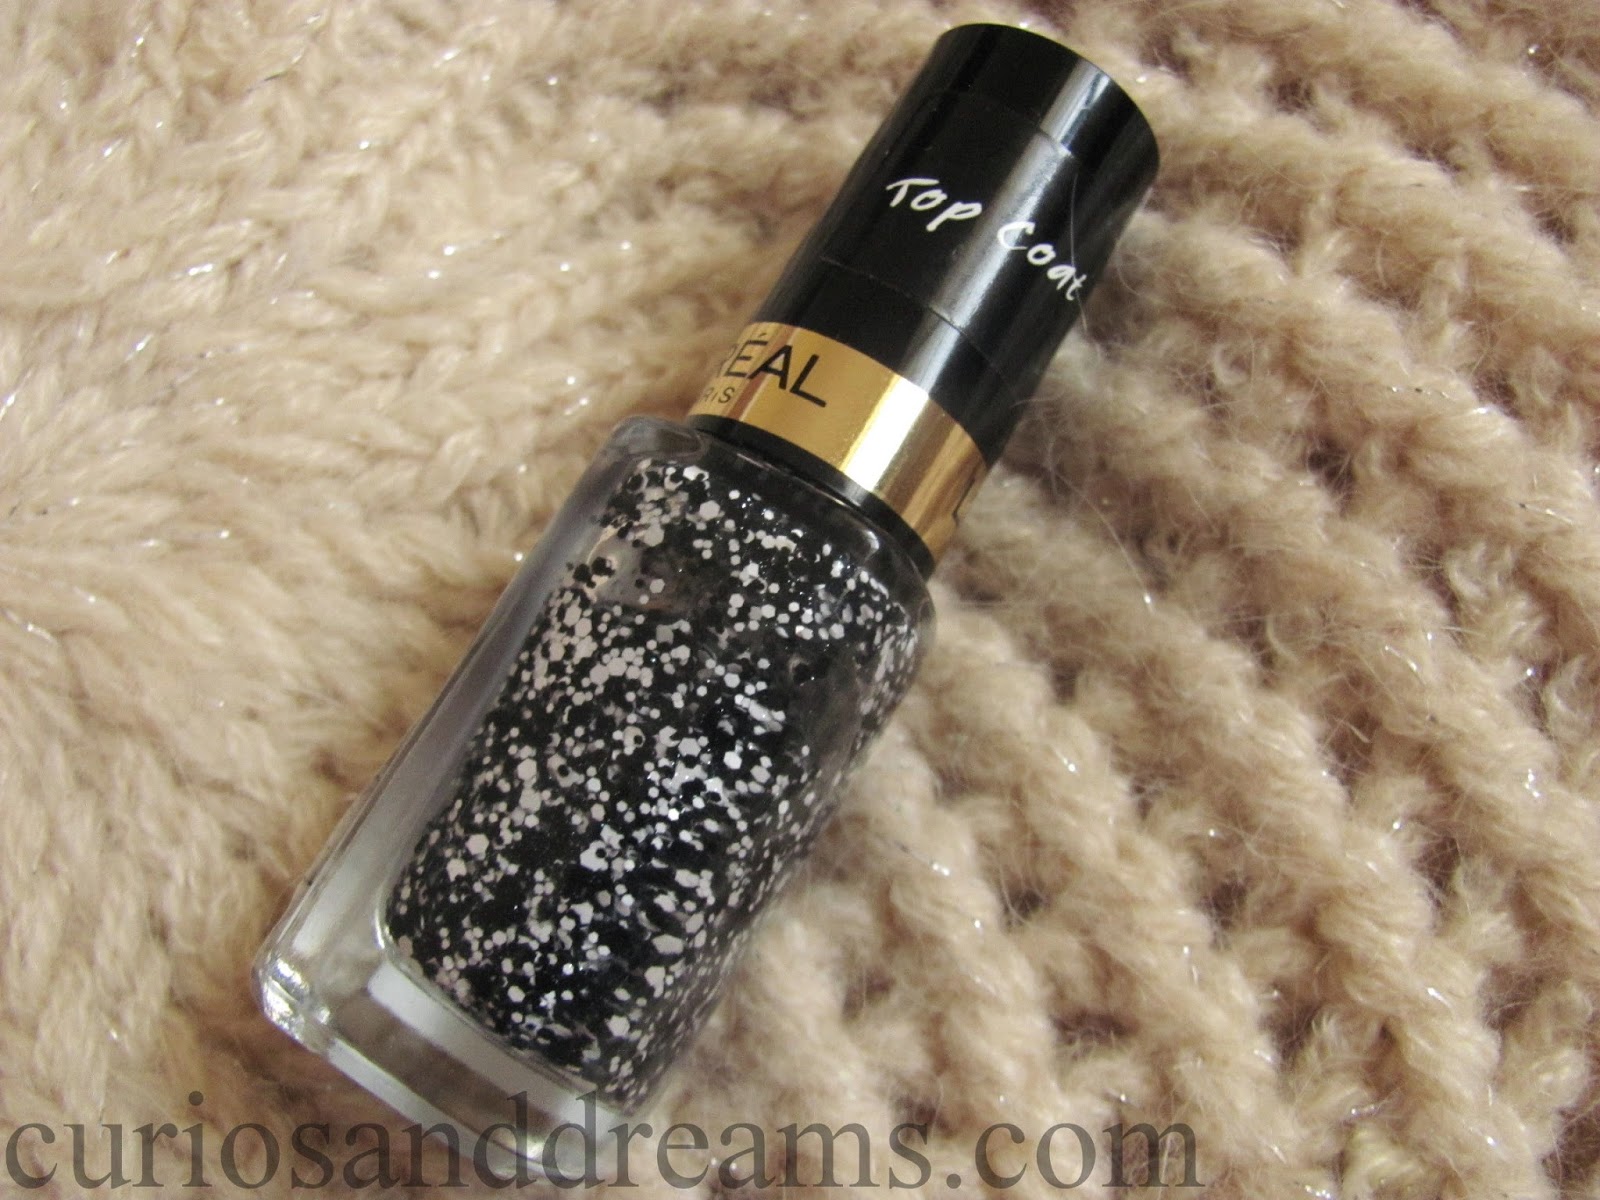 L'oreal Color Riche Le Vernis Top Coat, Confettis : Review and Swatch -  Curios and Dreams - Indian Skincare and Beauty